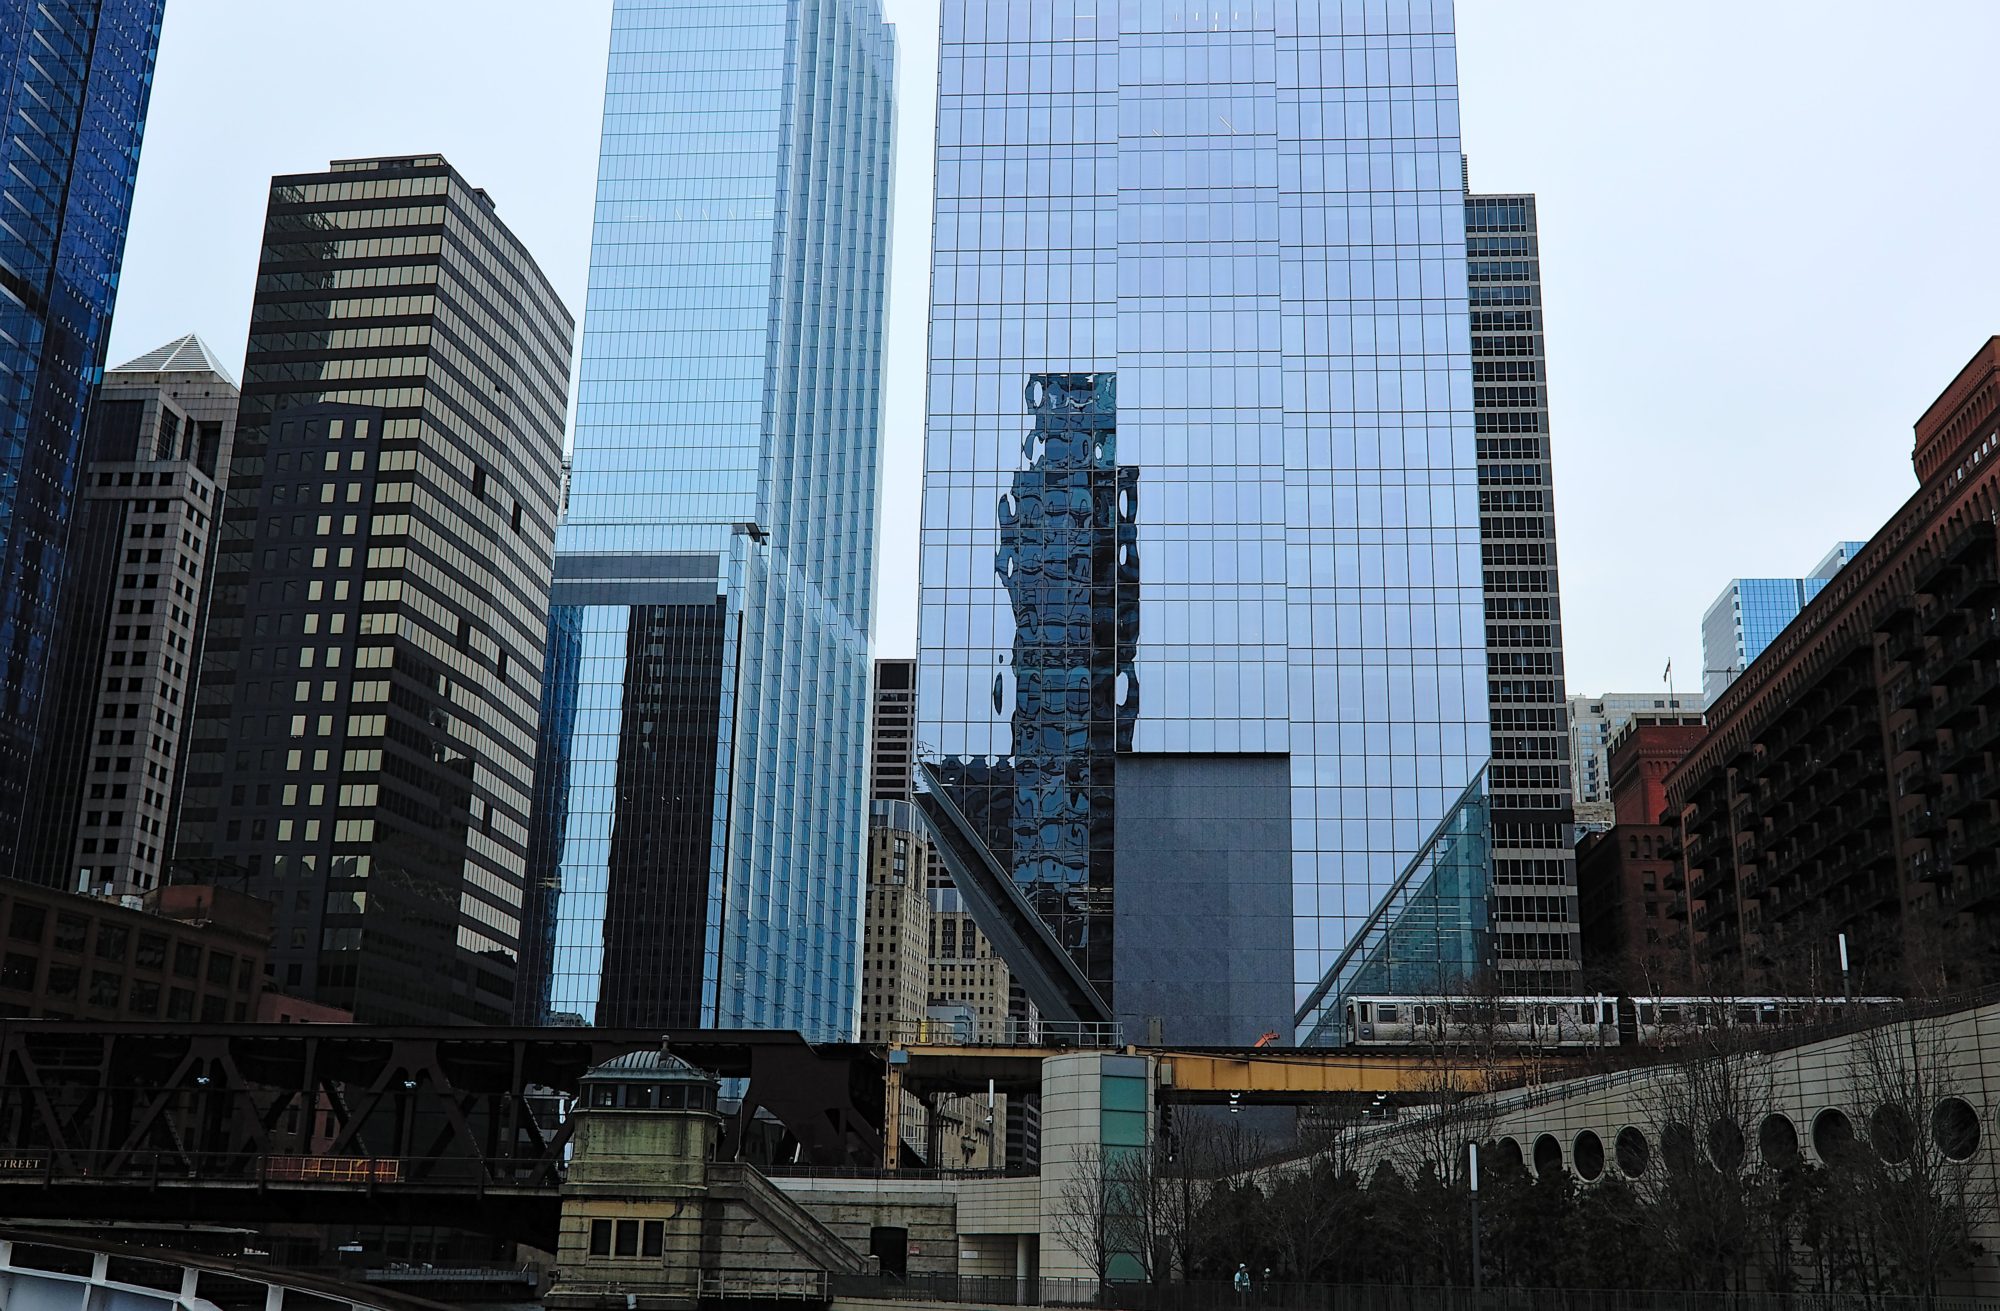 View of buildings in Chicago from the Wendella tour